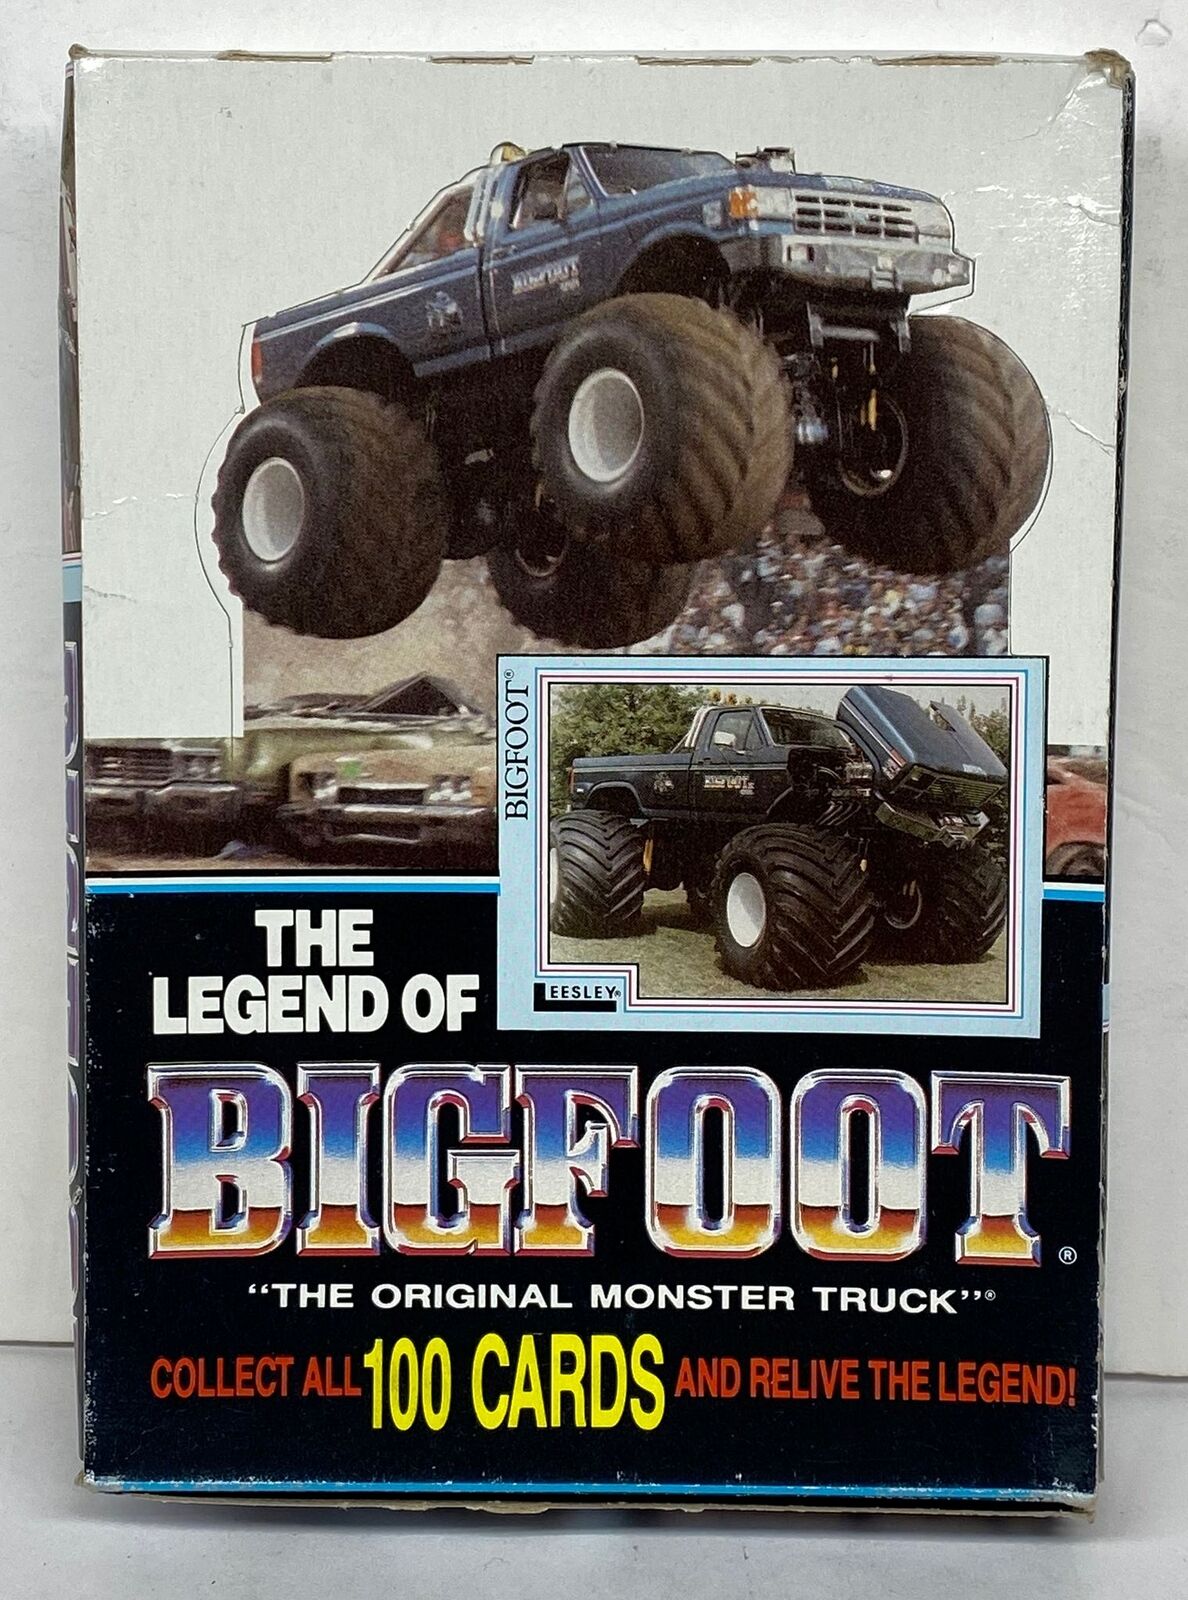 1988 The Legend of Bigfoot Monster Truck Trading Card Wax Box 48 Packs Leesley